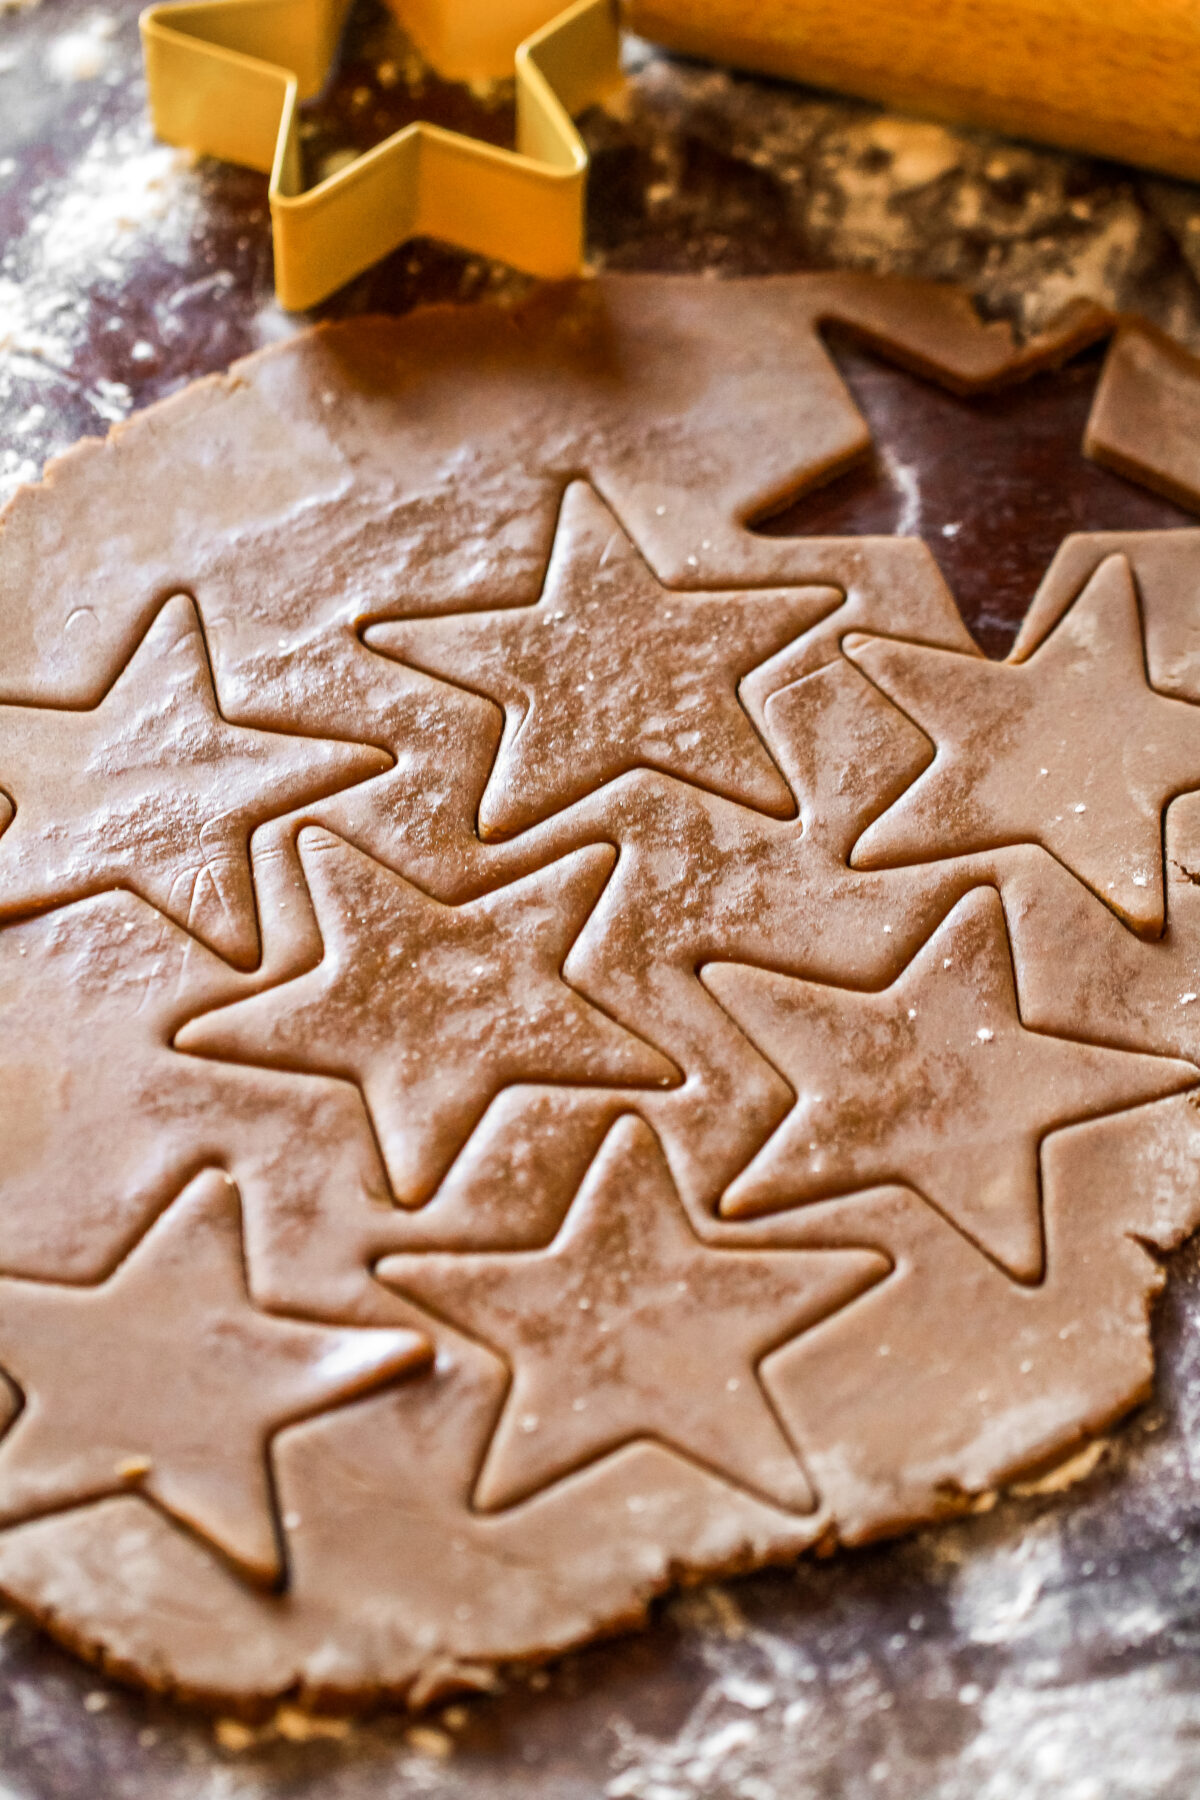 stars being cut out of gingerbread dough.